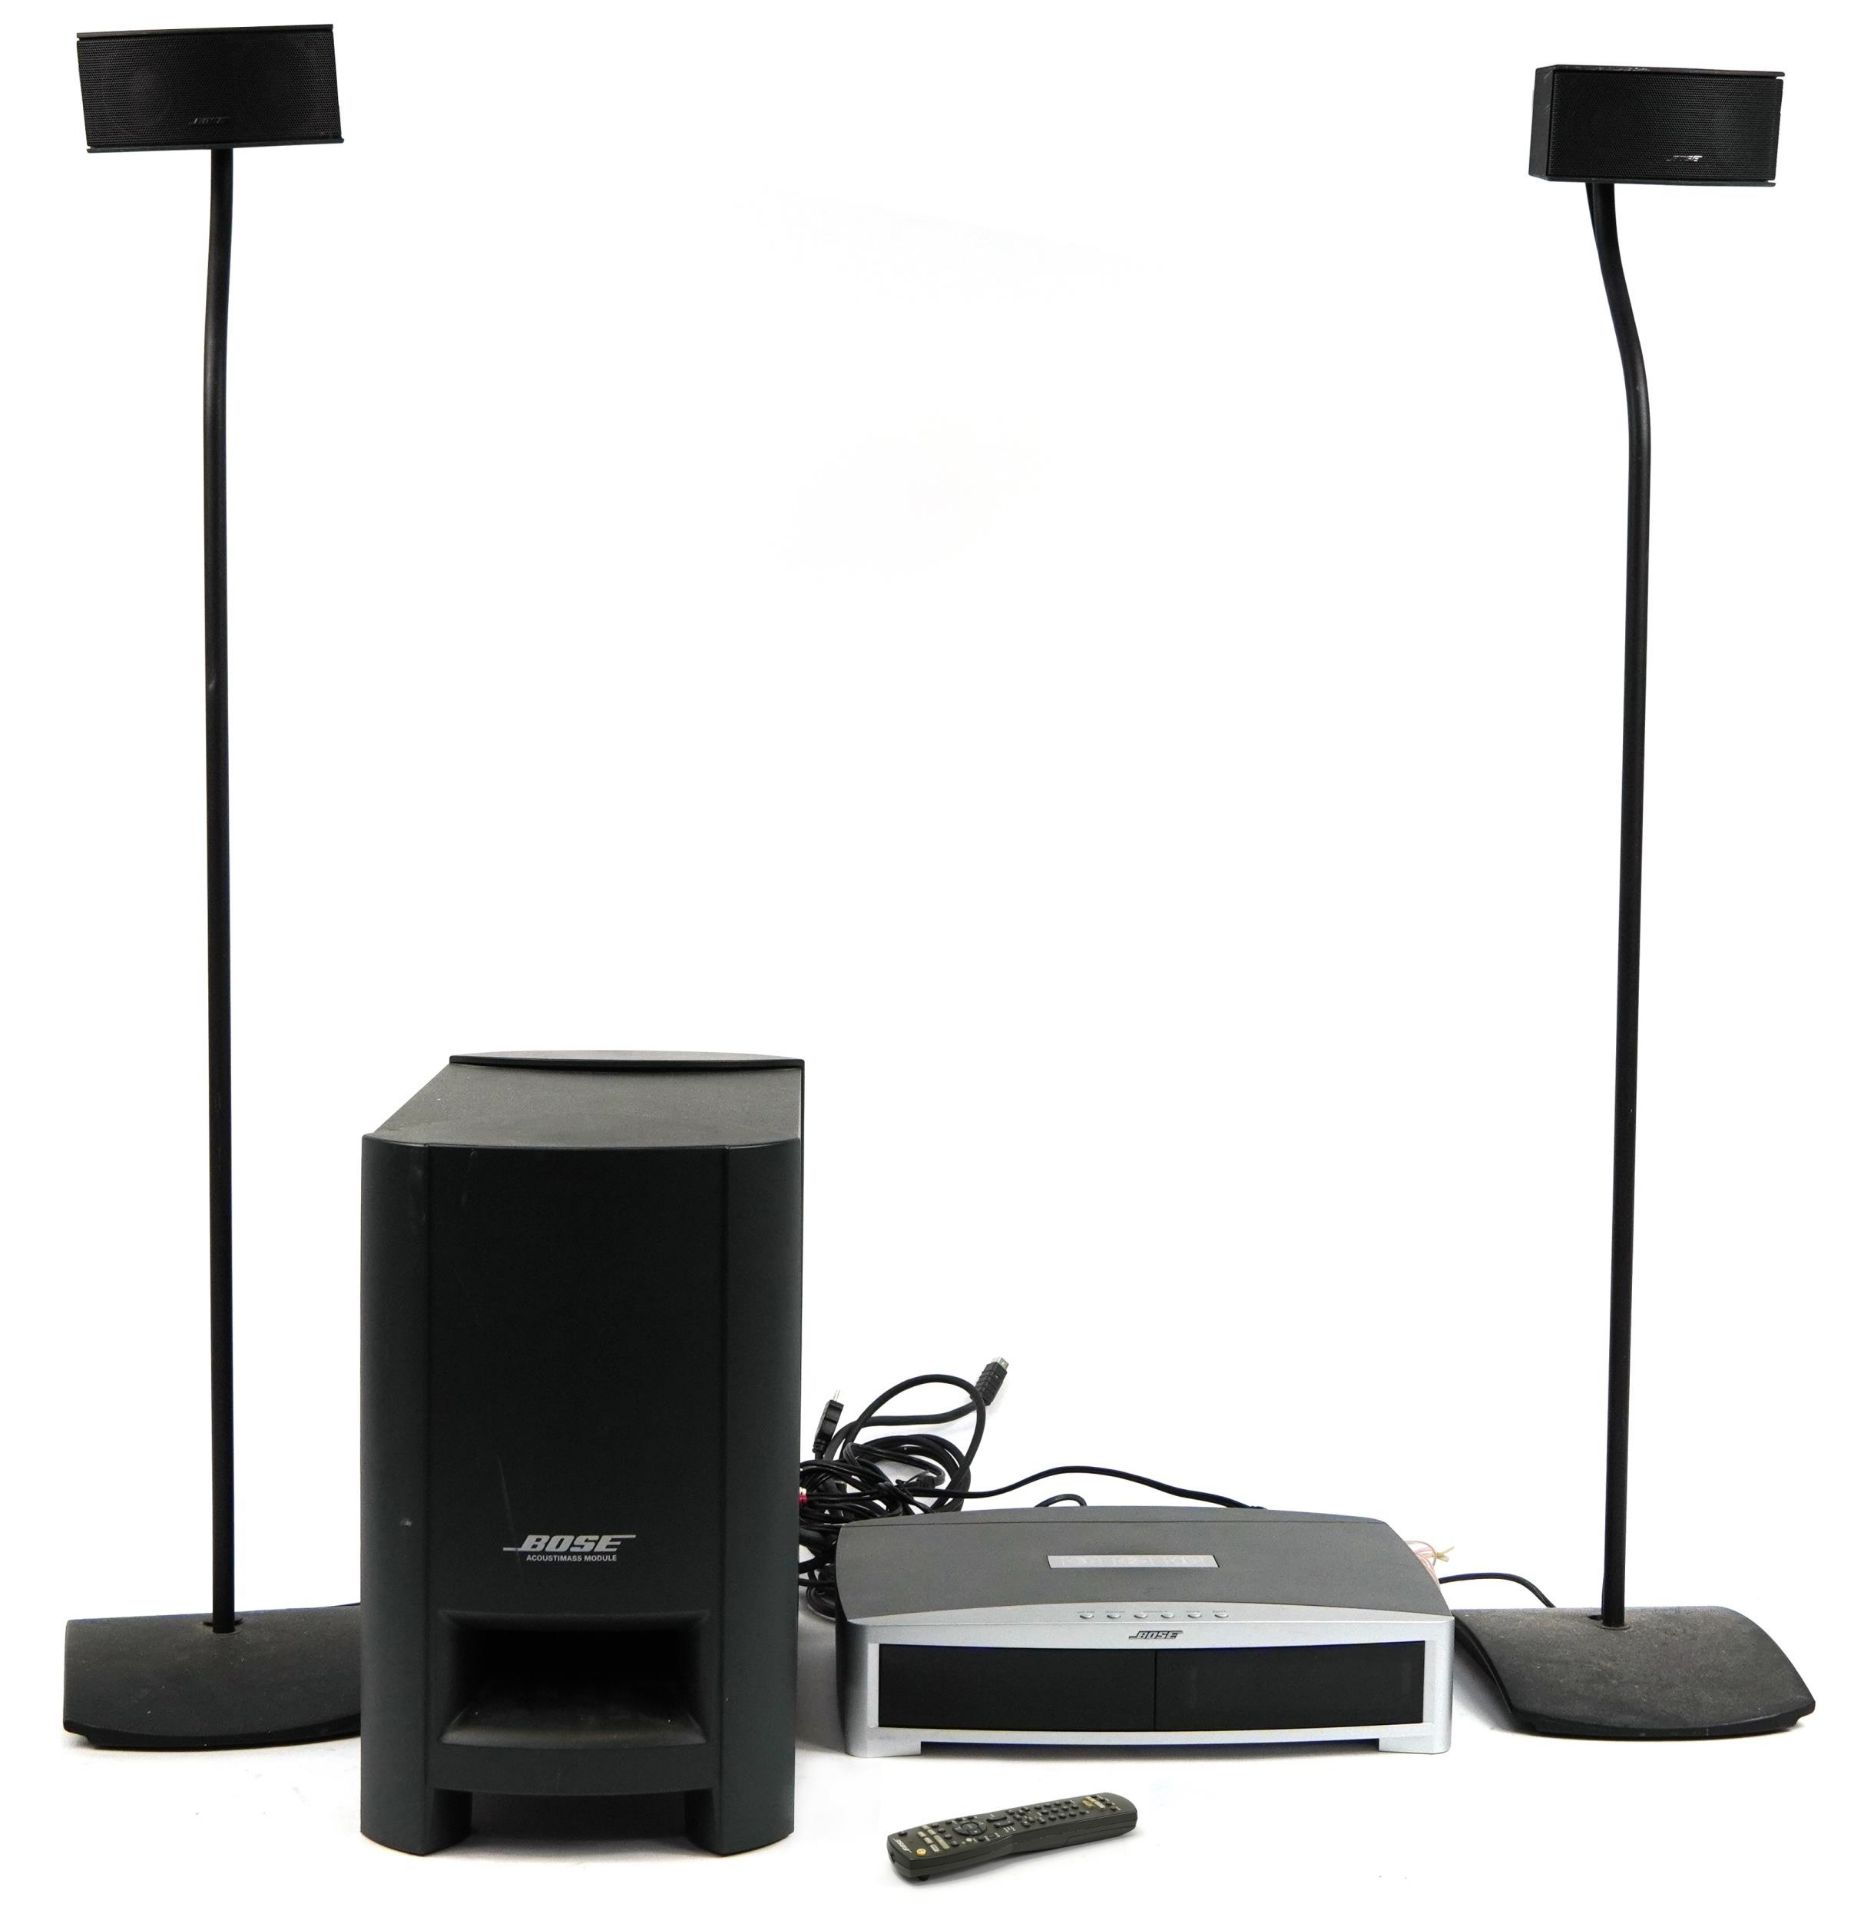 Bose audio equipment, DVD home entertainment system model GSX Series III with speakers and remote